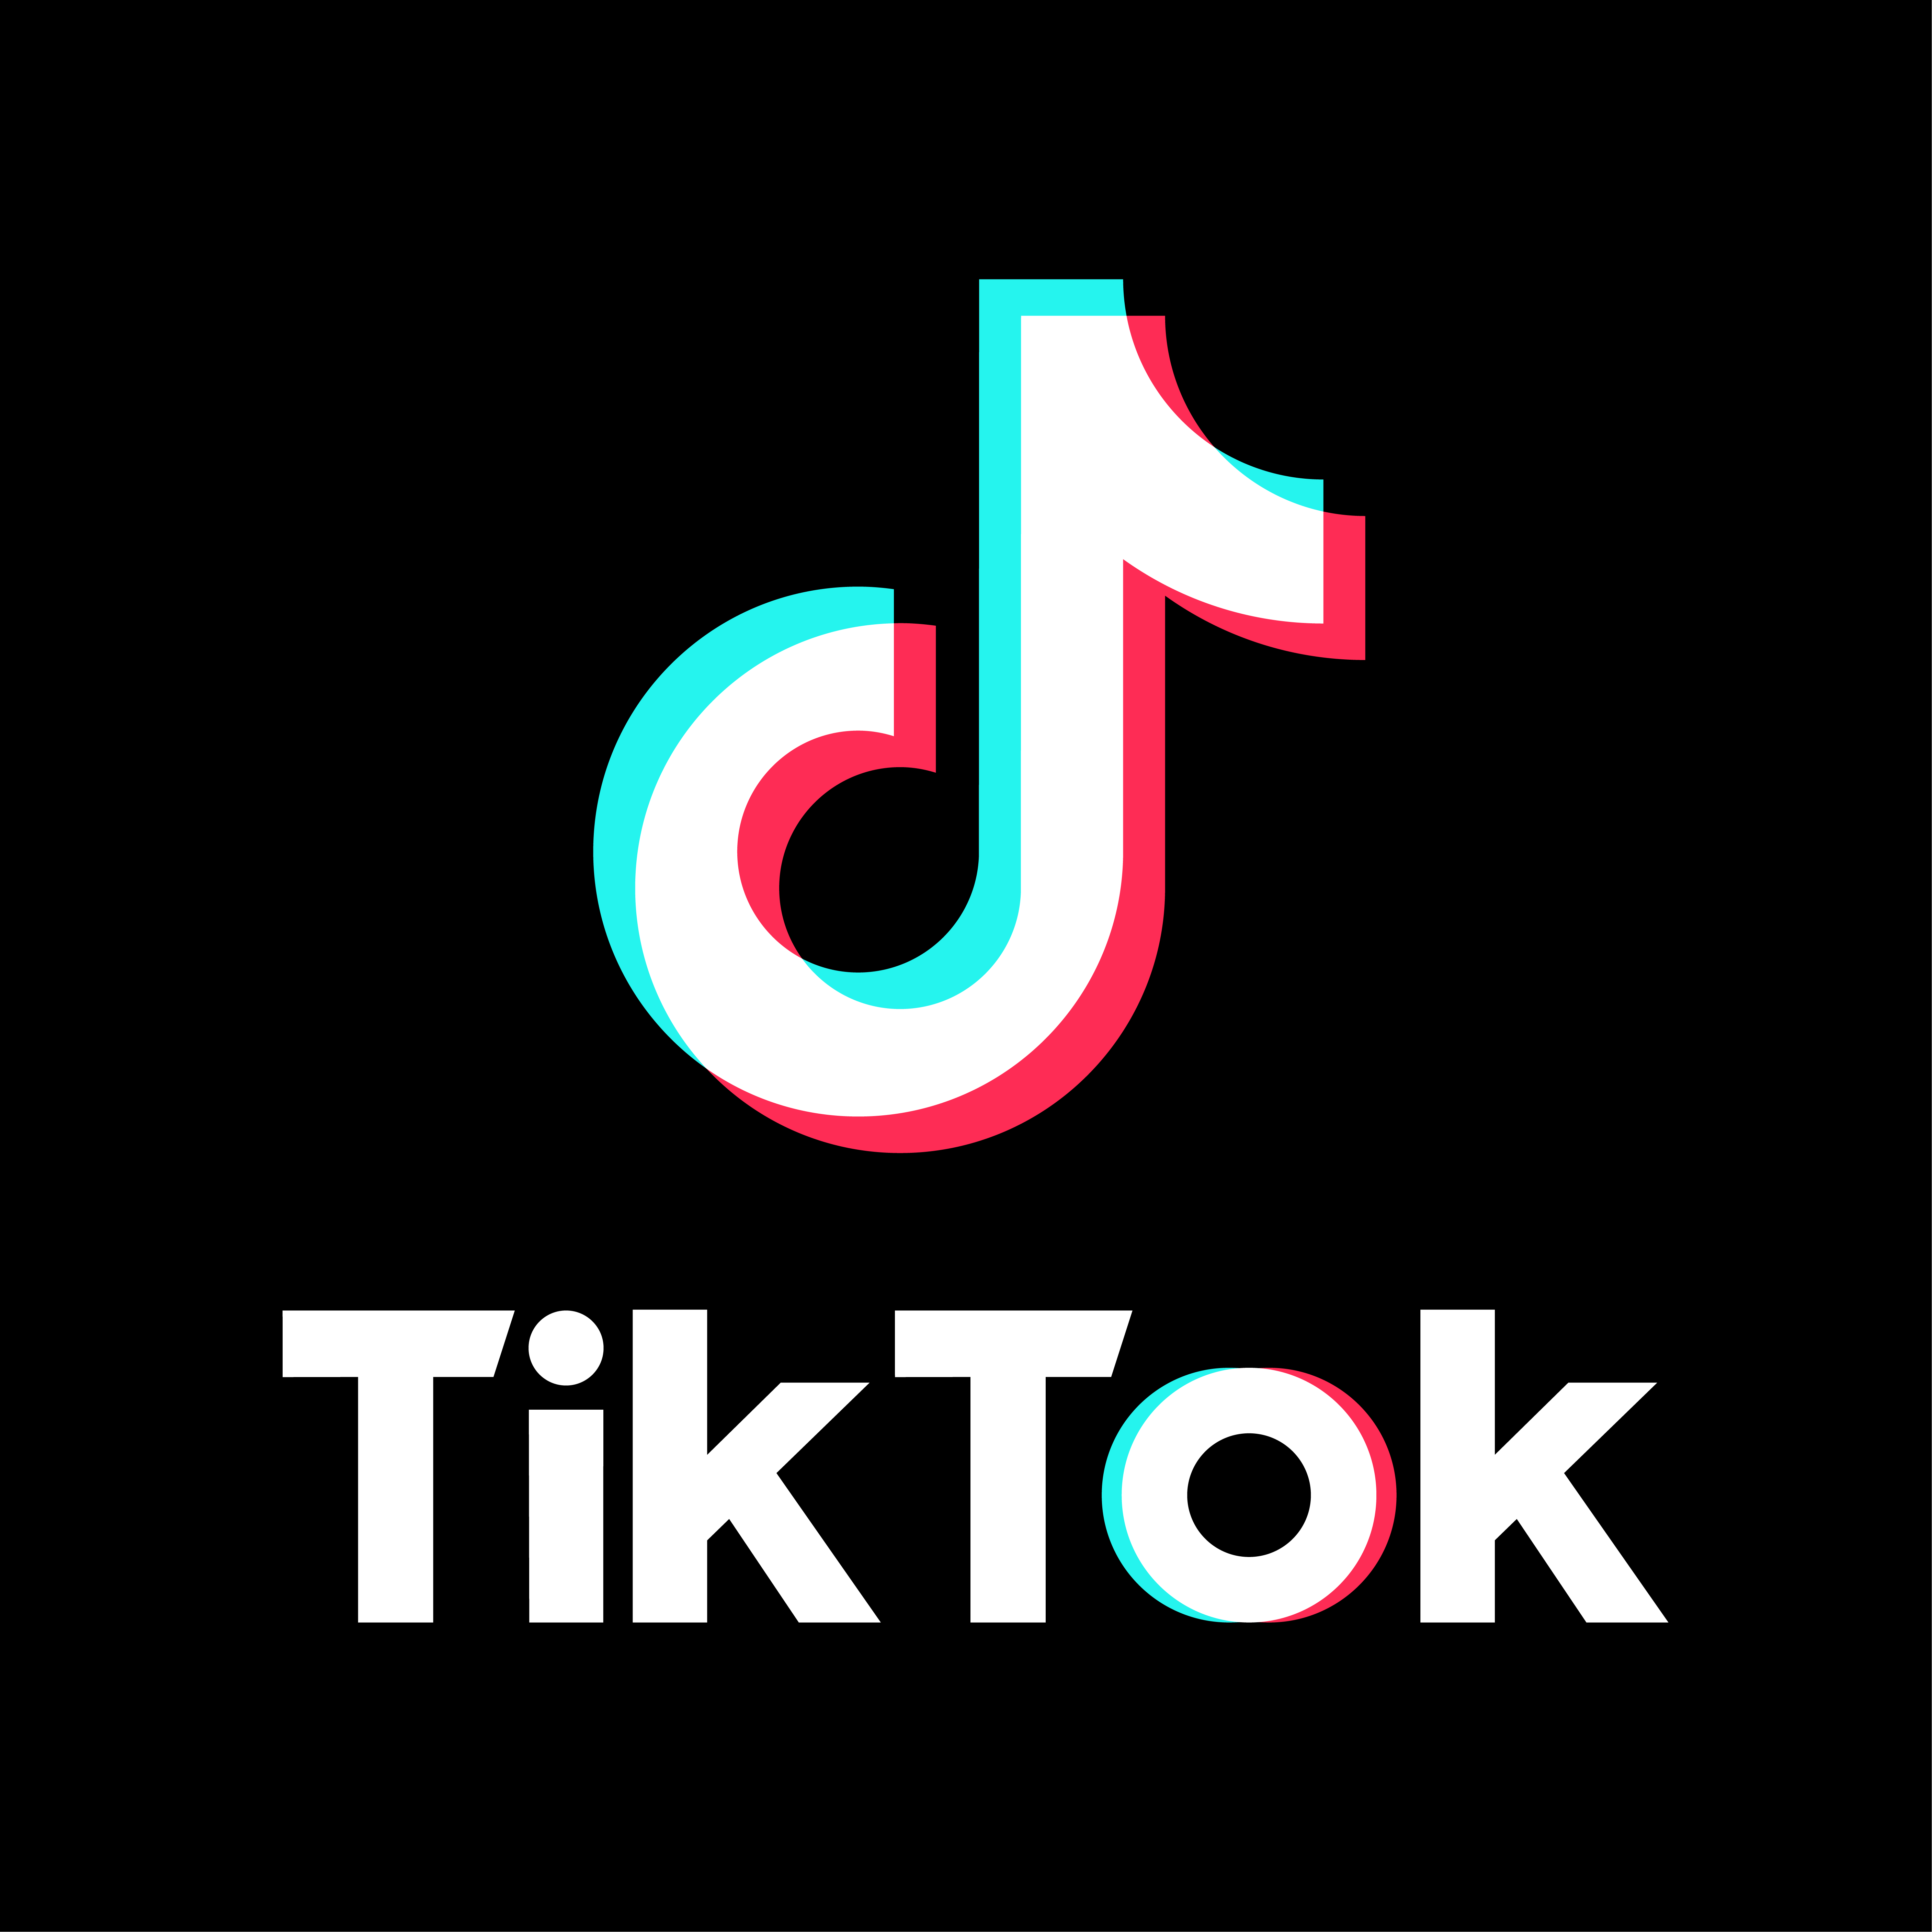 What We Doin Created By City Girls Popular Songs On Tiktok